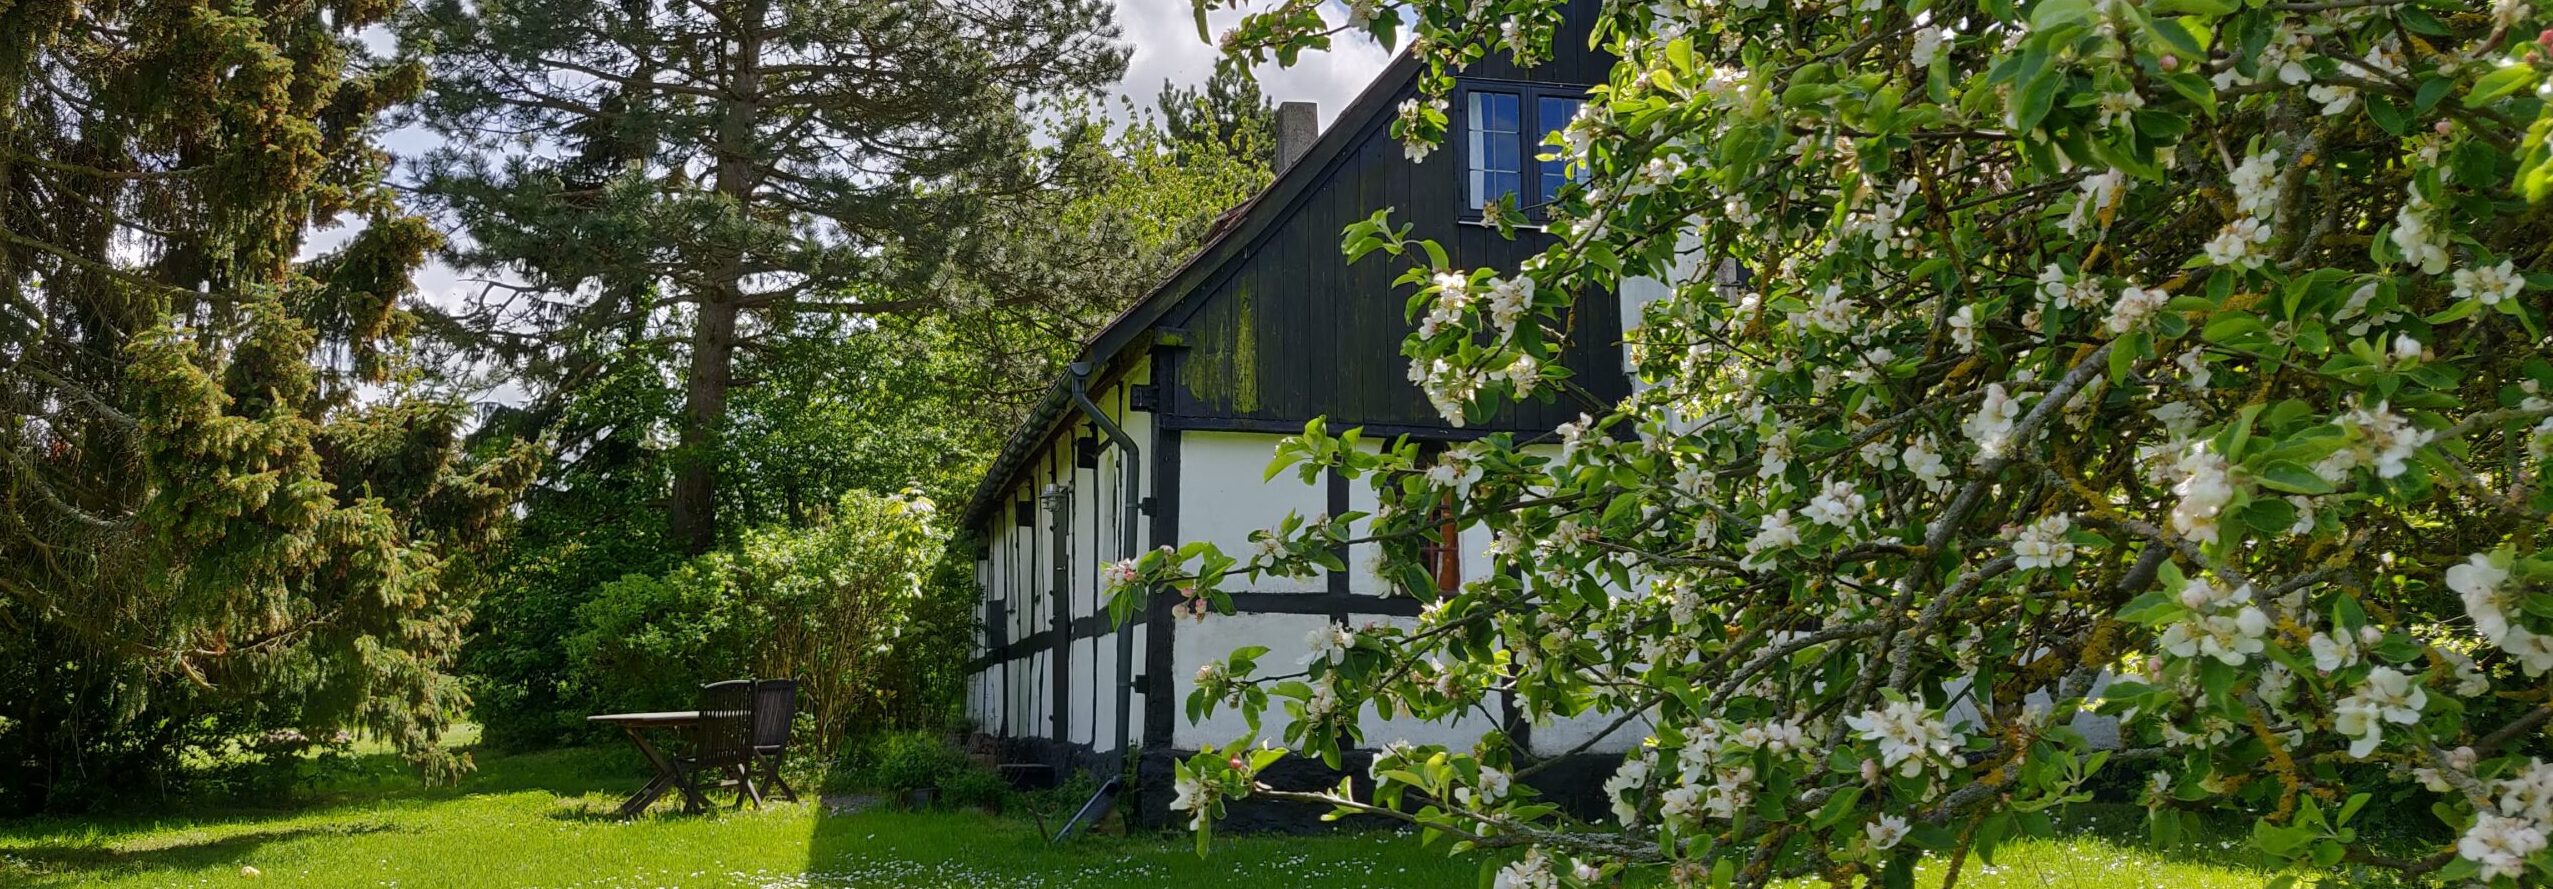 The Stavehøl guesthouse